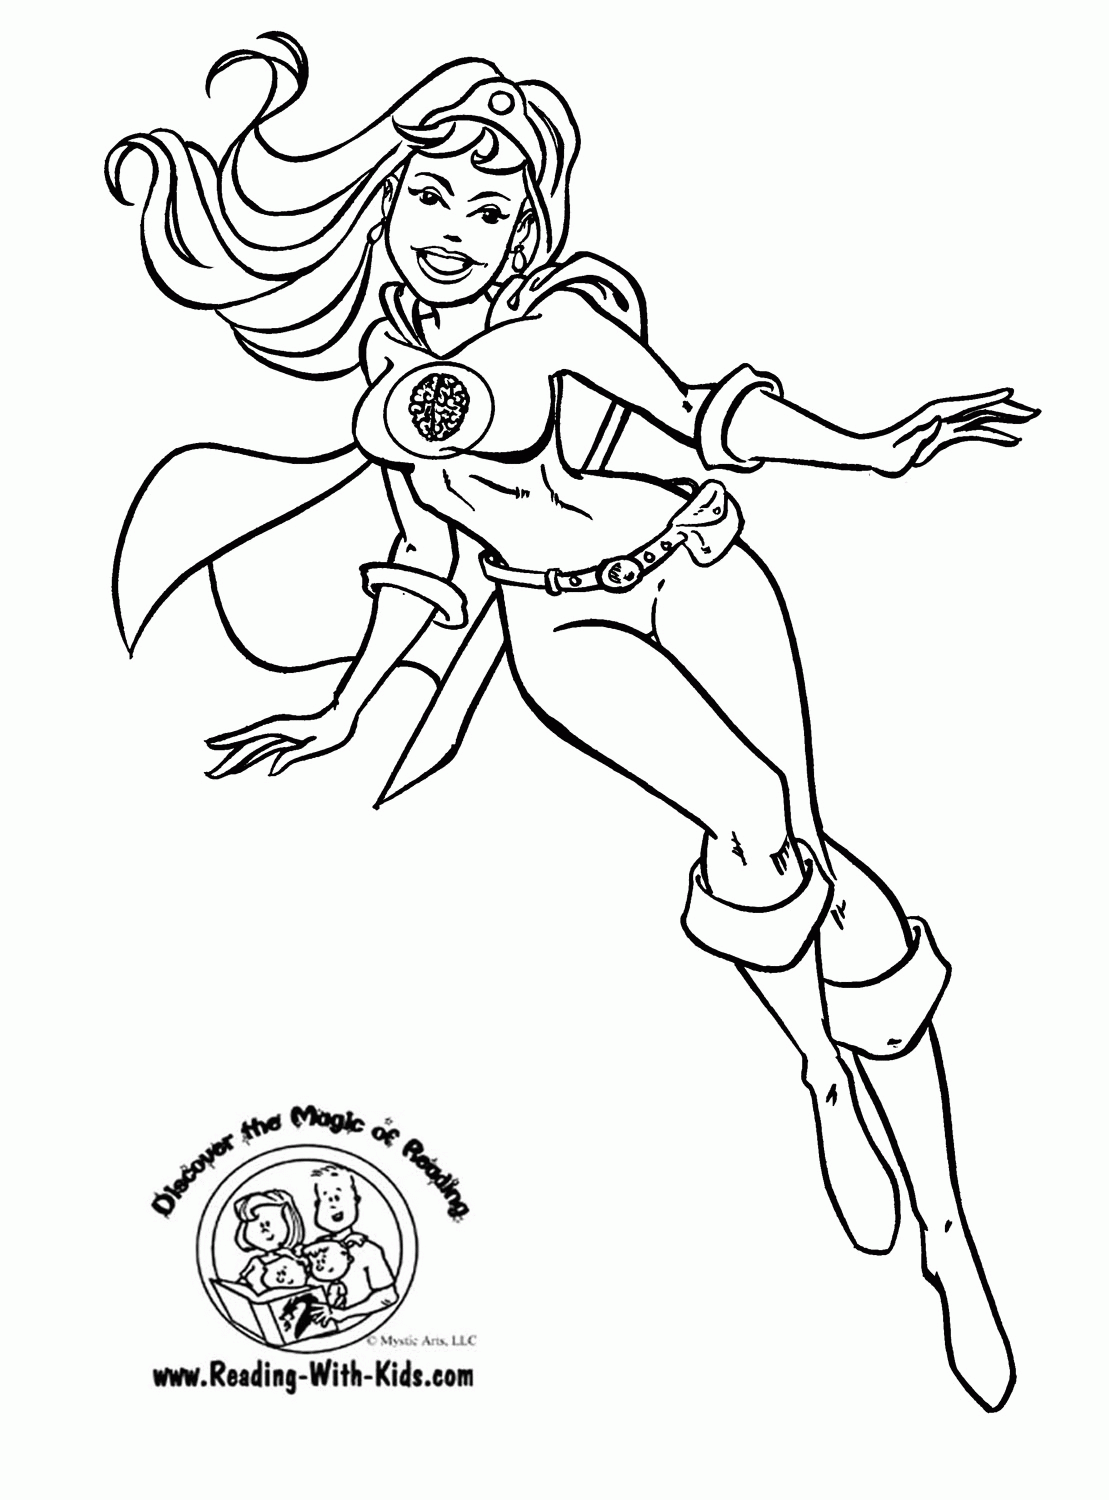 Download Supergirl Printable Coloring Pages - Coloring Home